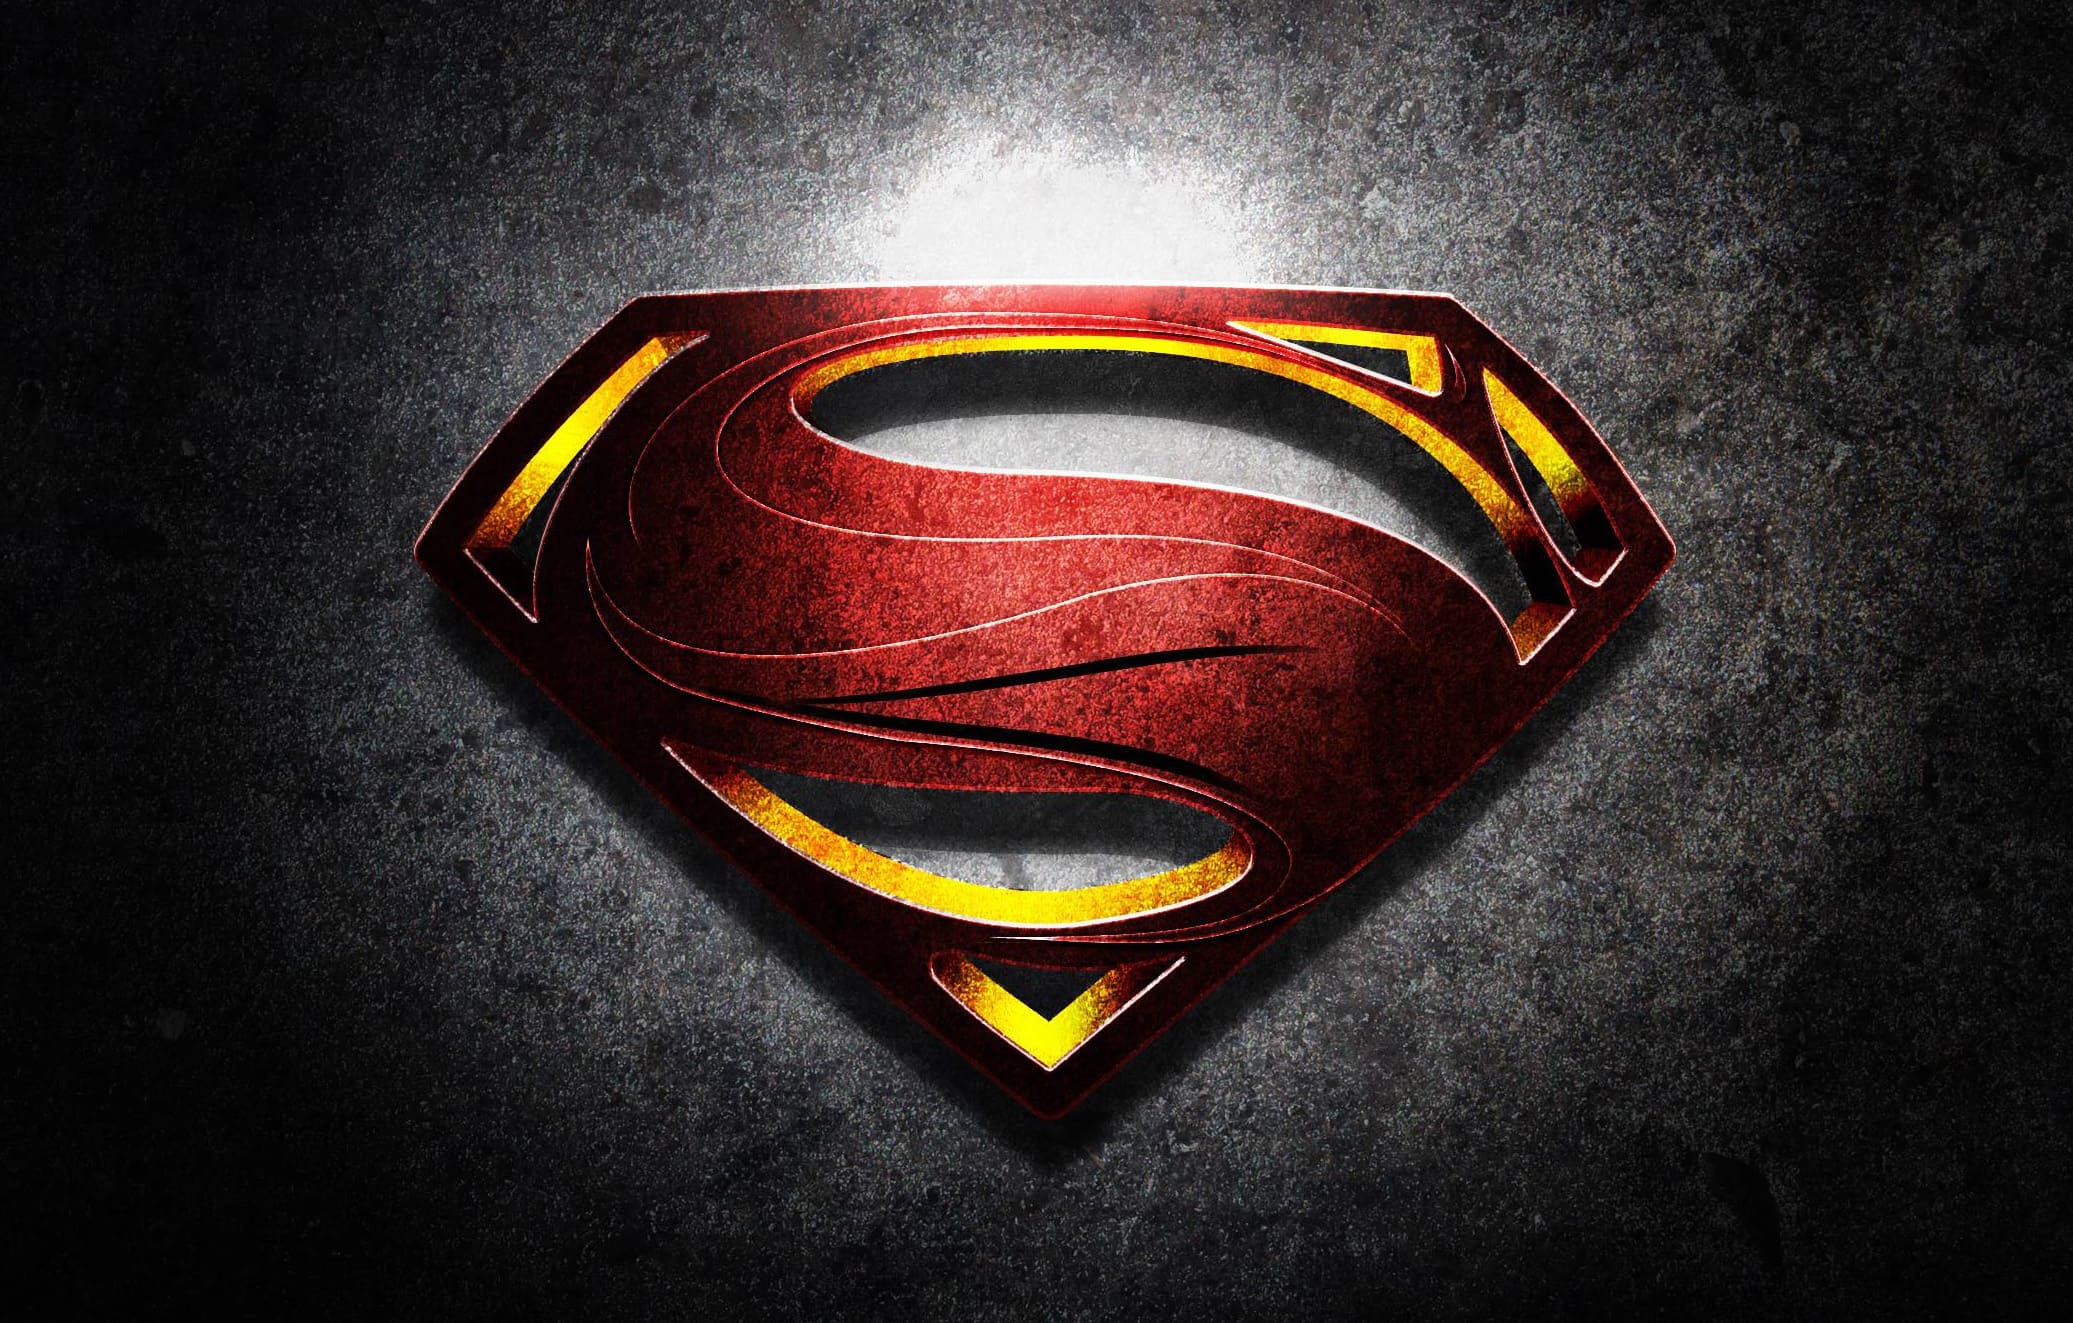 Superman logo and symbol, meaning, history, PNG, brand